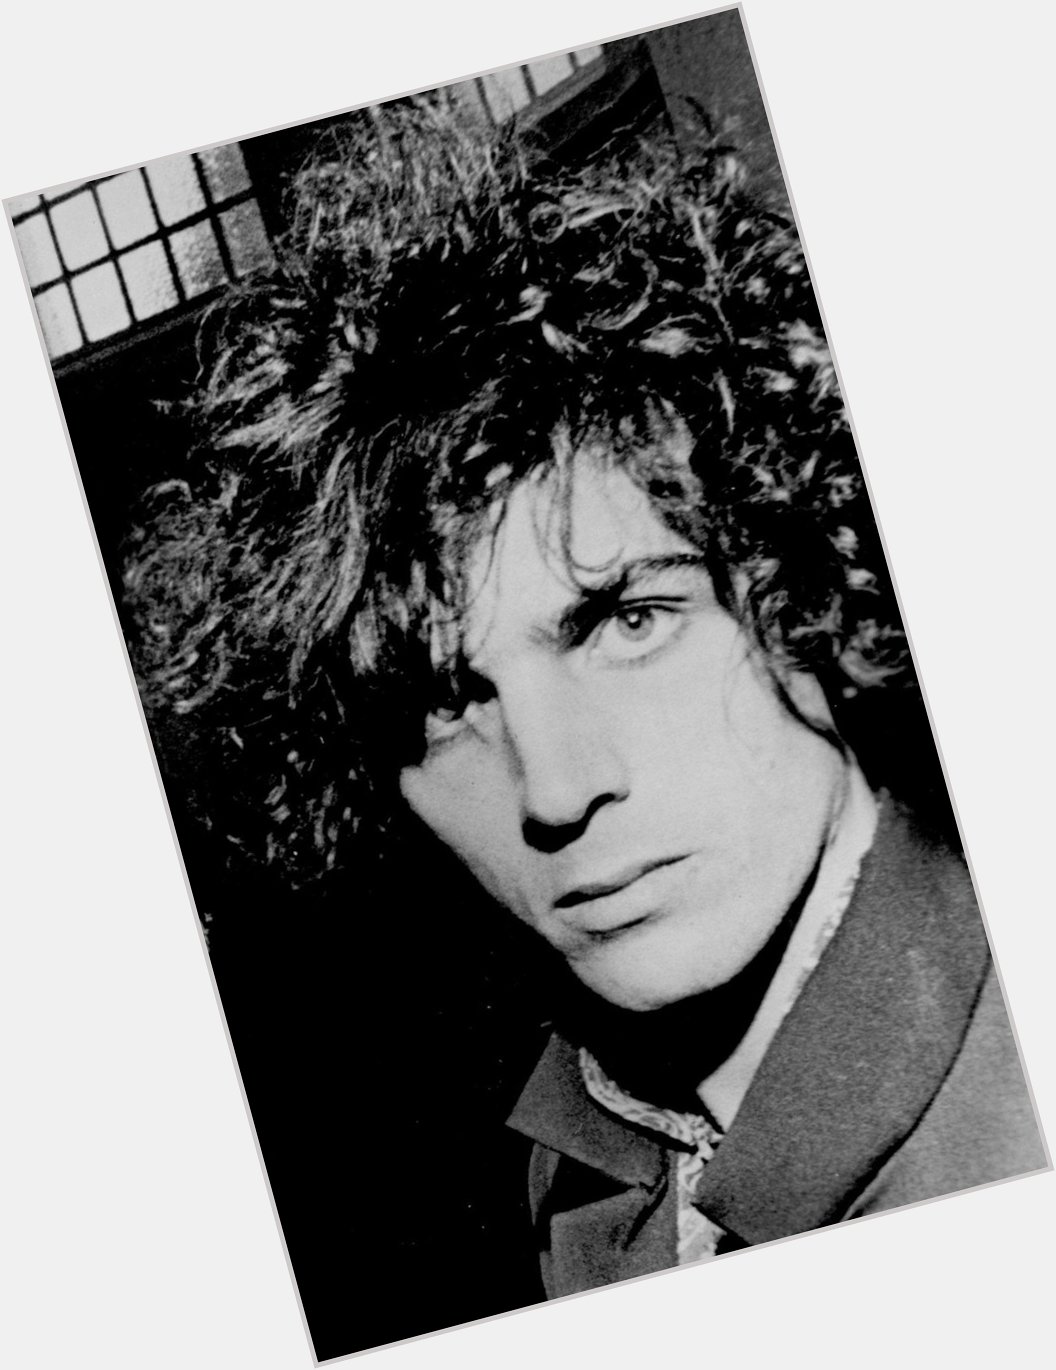 Happy 69th Birthday to the late, great founder of Pink Floyd, Syd Barrett! \"Shine on you crazy diamond.\" 